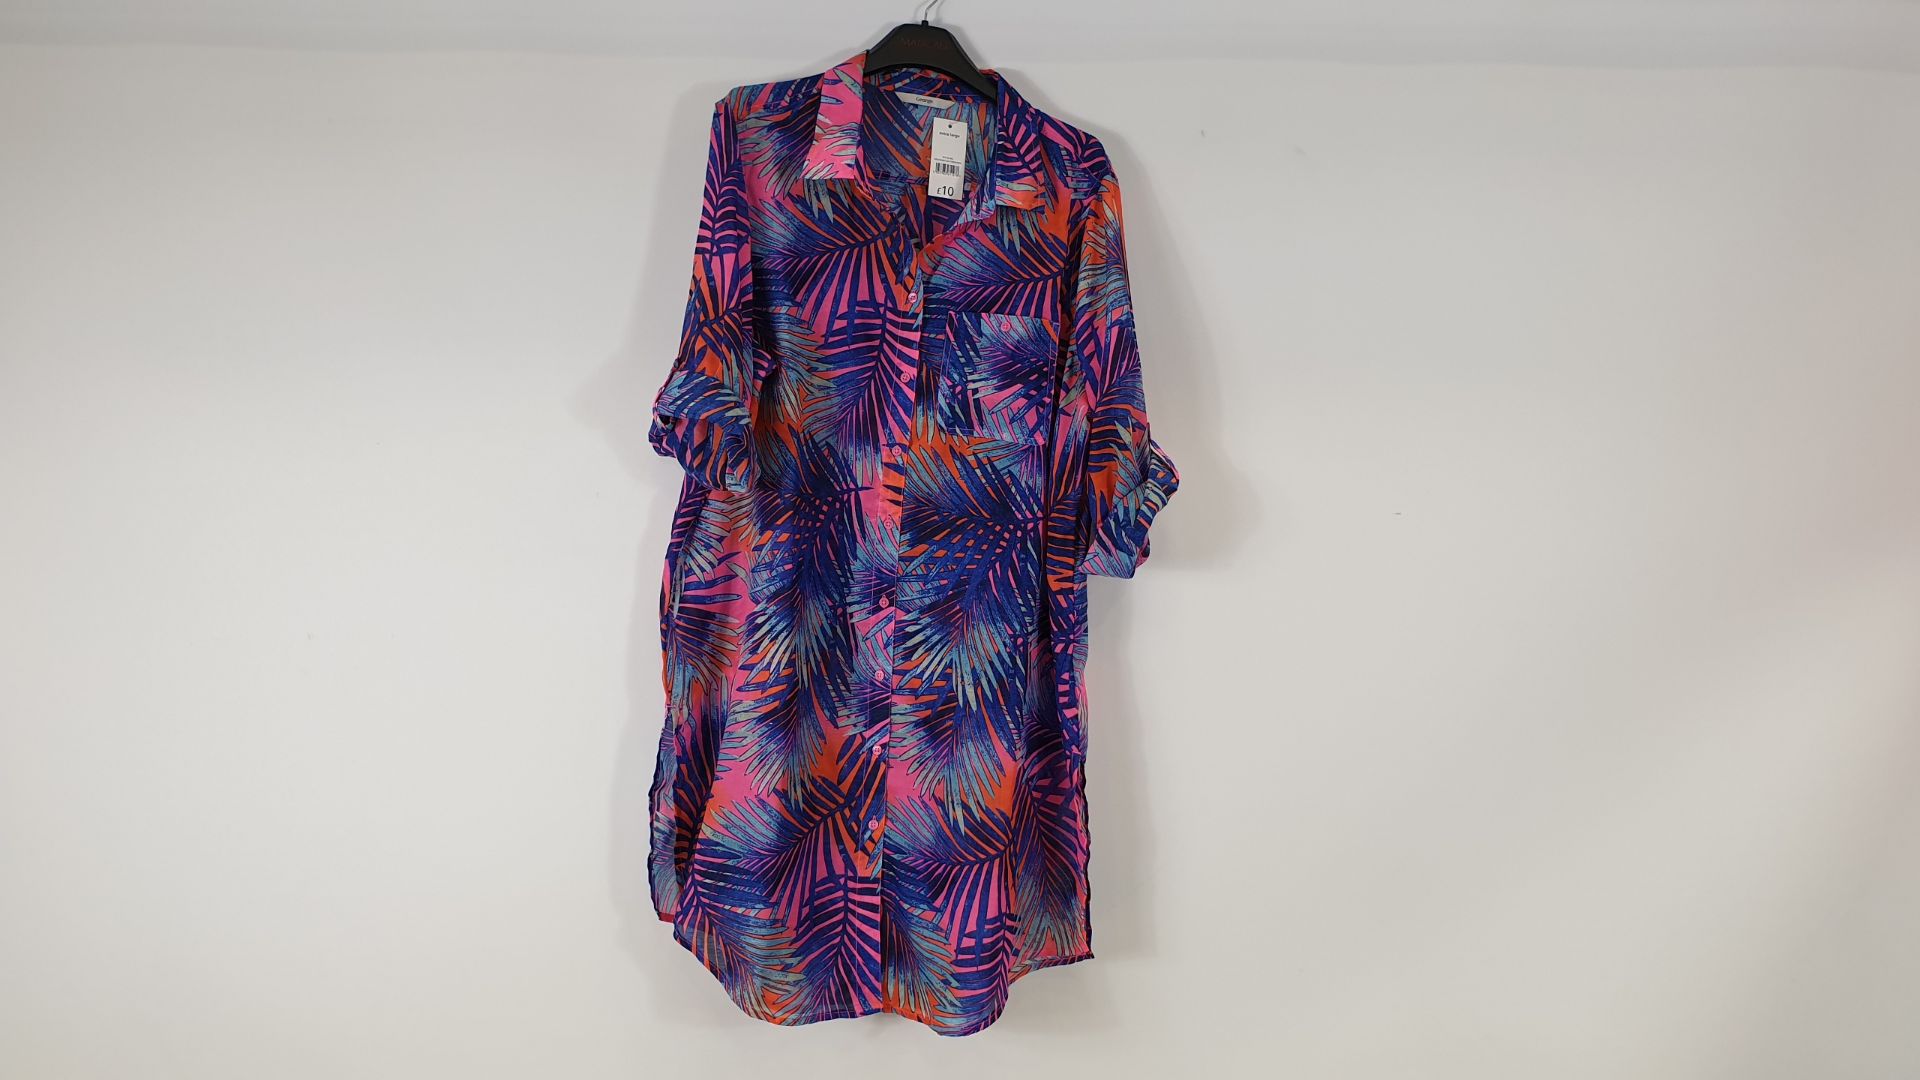 100 X BRAND NEW MULTI COLOURED BEACH SHIRTS BY GEORGE - SIZE L - (28911) RRP £10 EACH - IN 1 CARTON